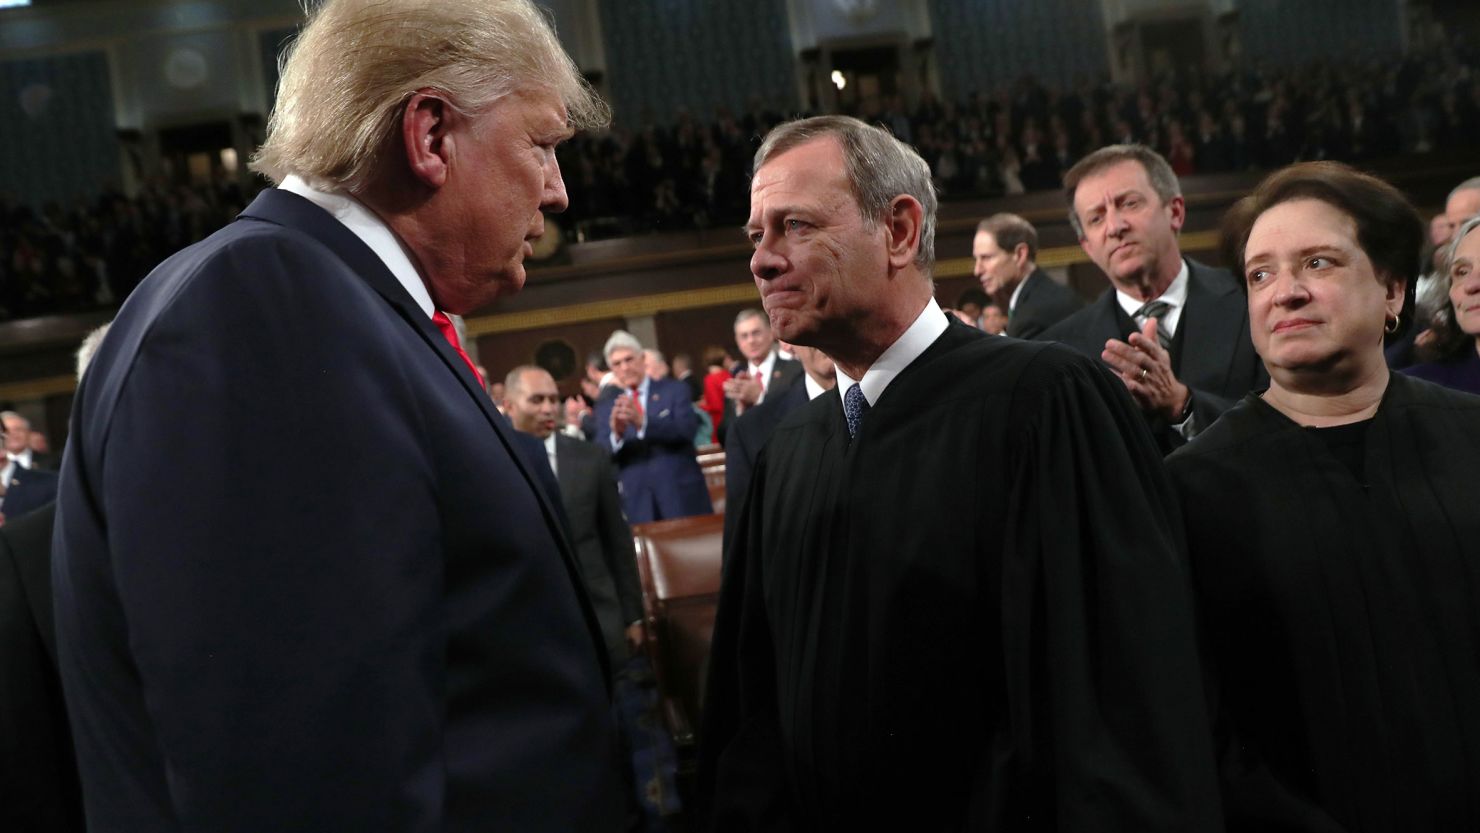 President Donald Trump talks with Supreme Court Chief Justice John Roberts as Associate Justice Elena Kagan looks on before the State of the Union address on February 4, 2020, in Washington, DC.